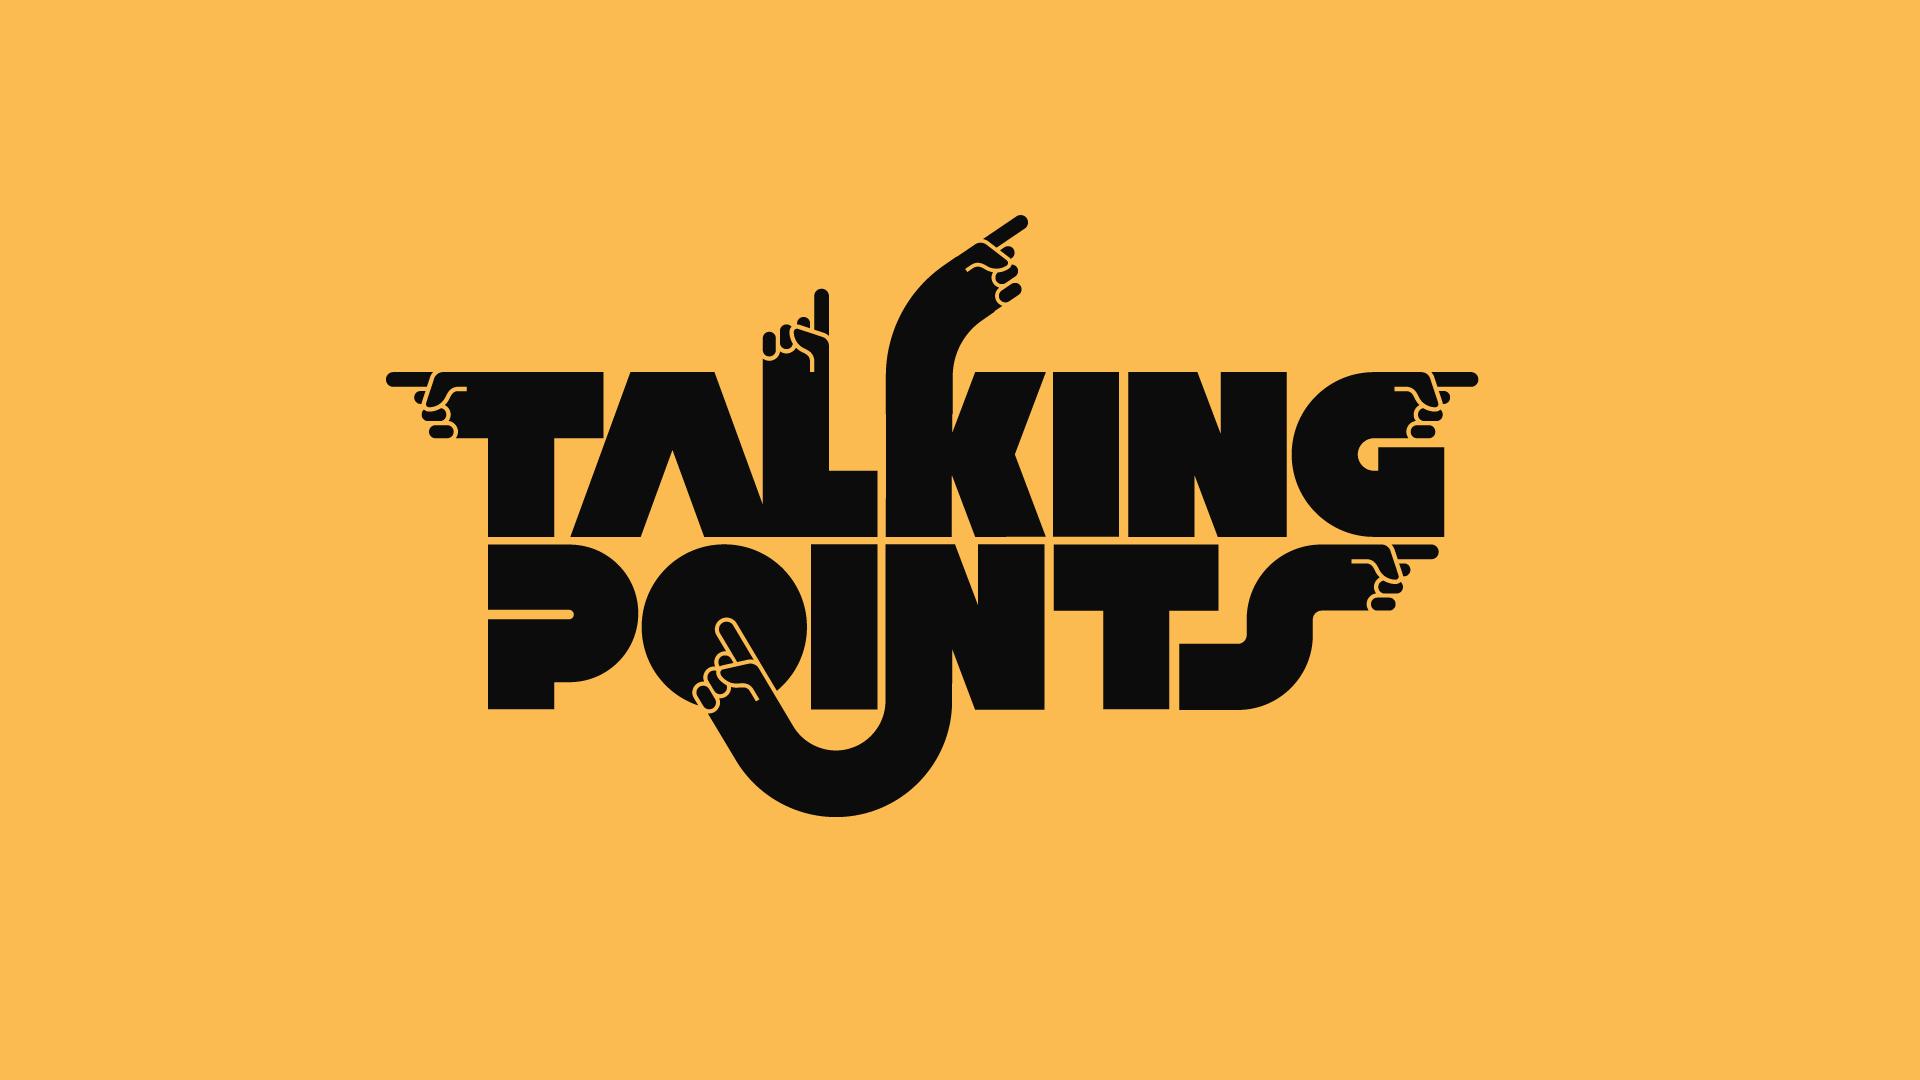 Talking Points: Putting on a Conference